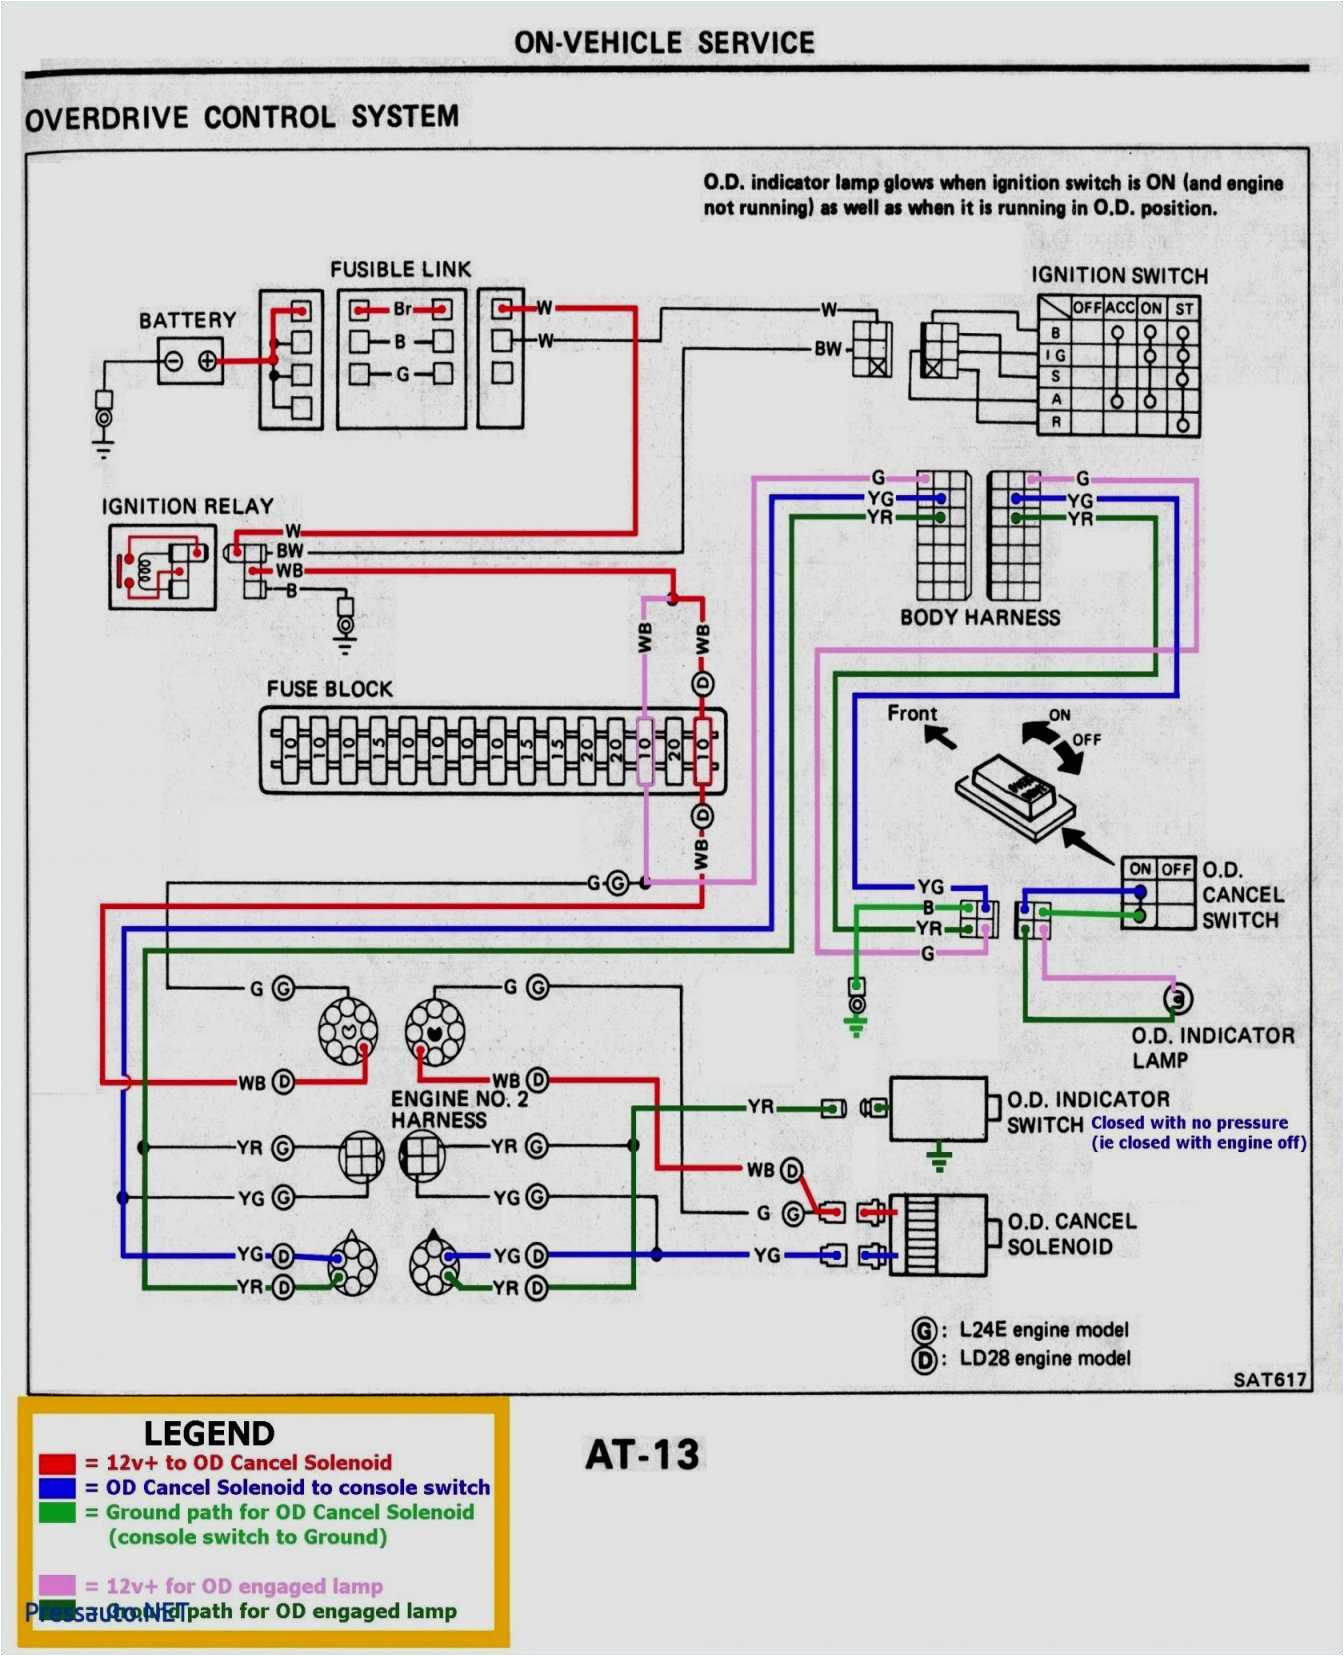 Time Clock Wiring Diagram Photocell and Timeclock Wiring Diagram Wiring Diagrams